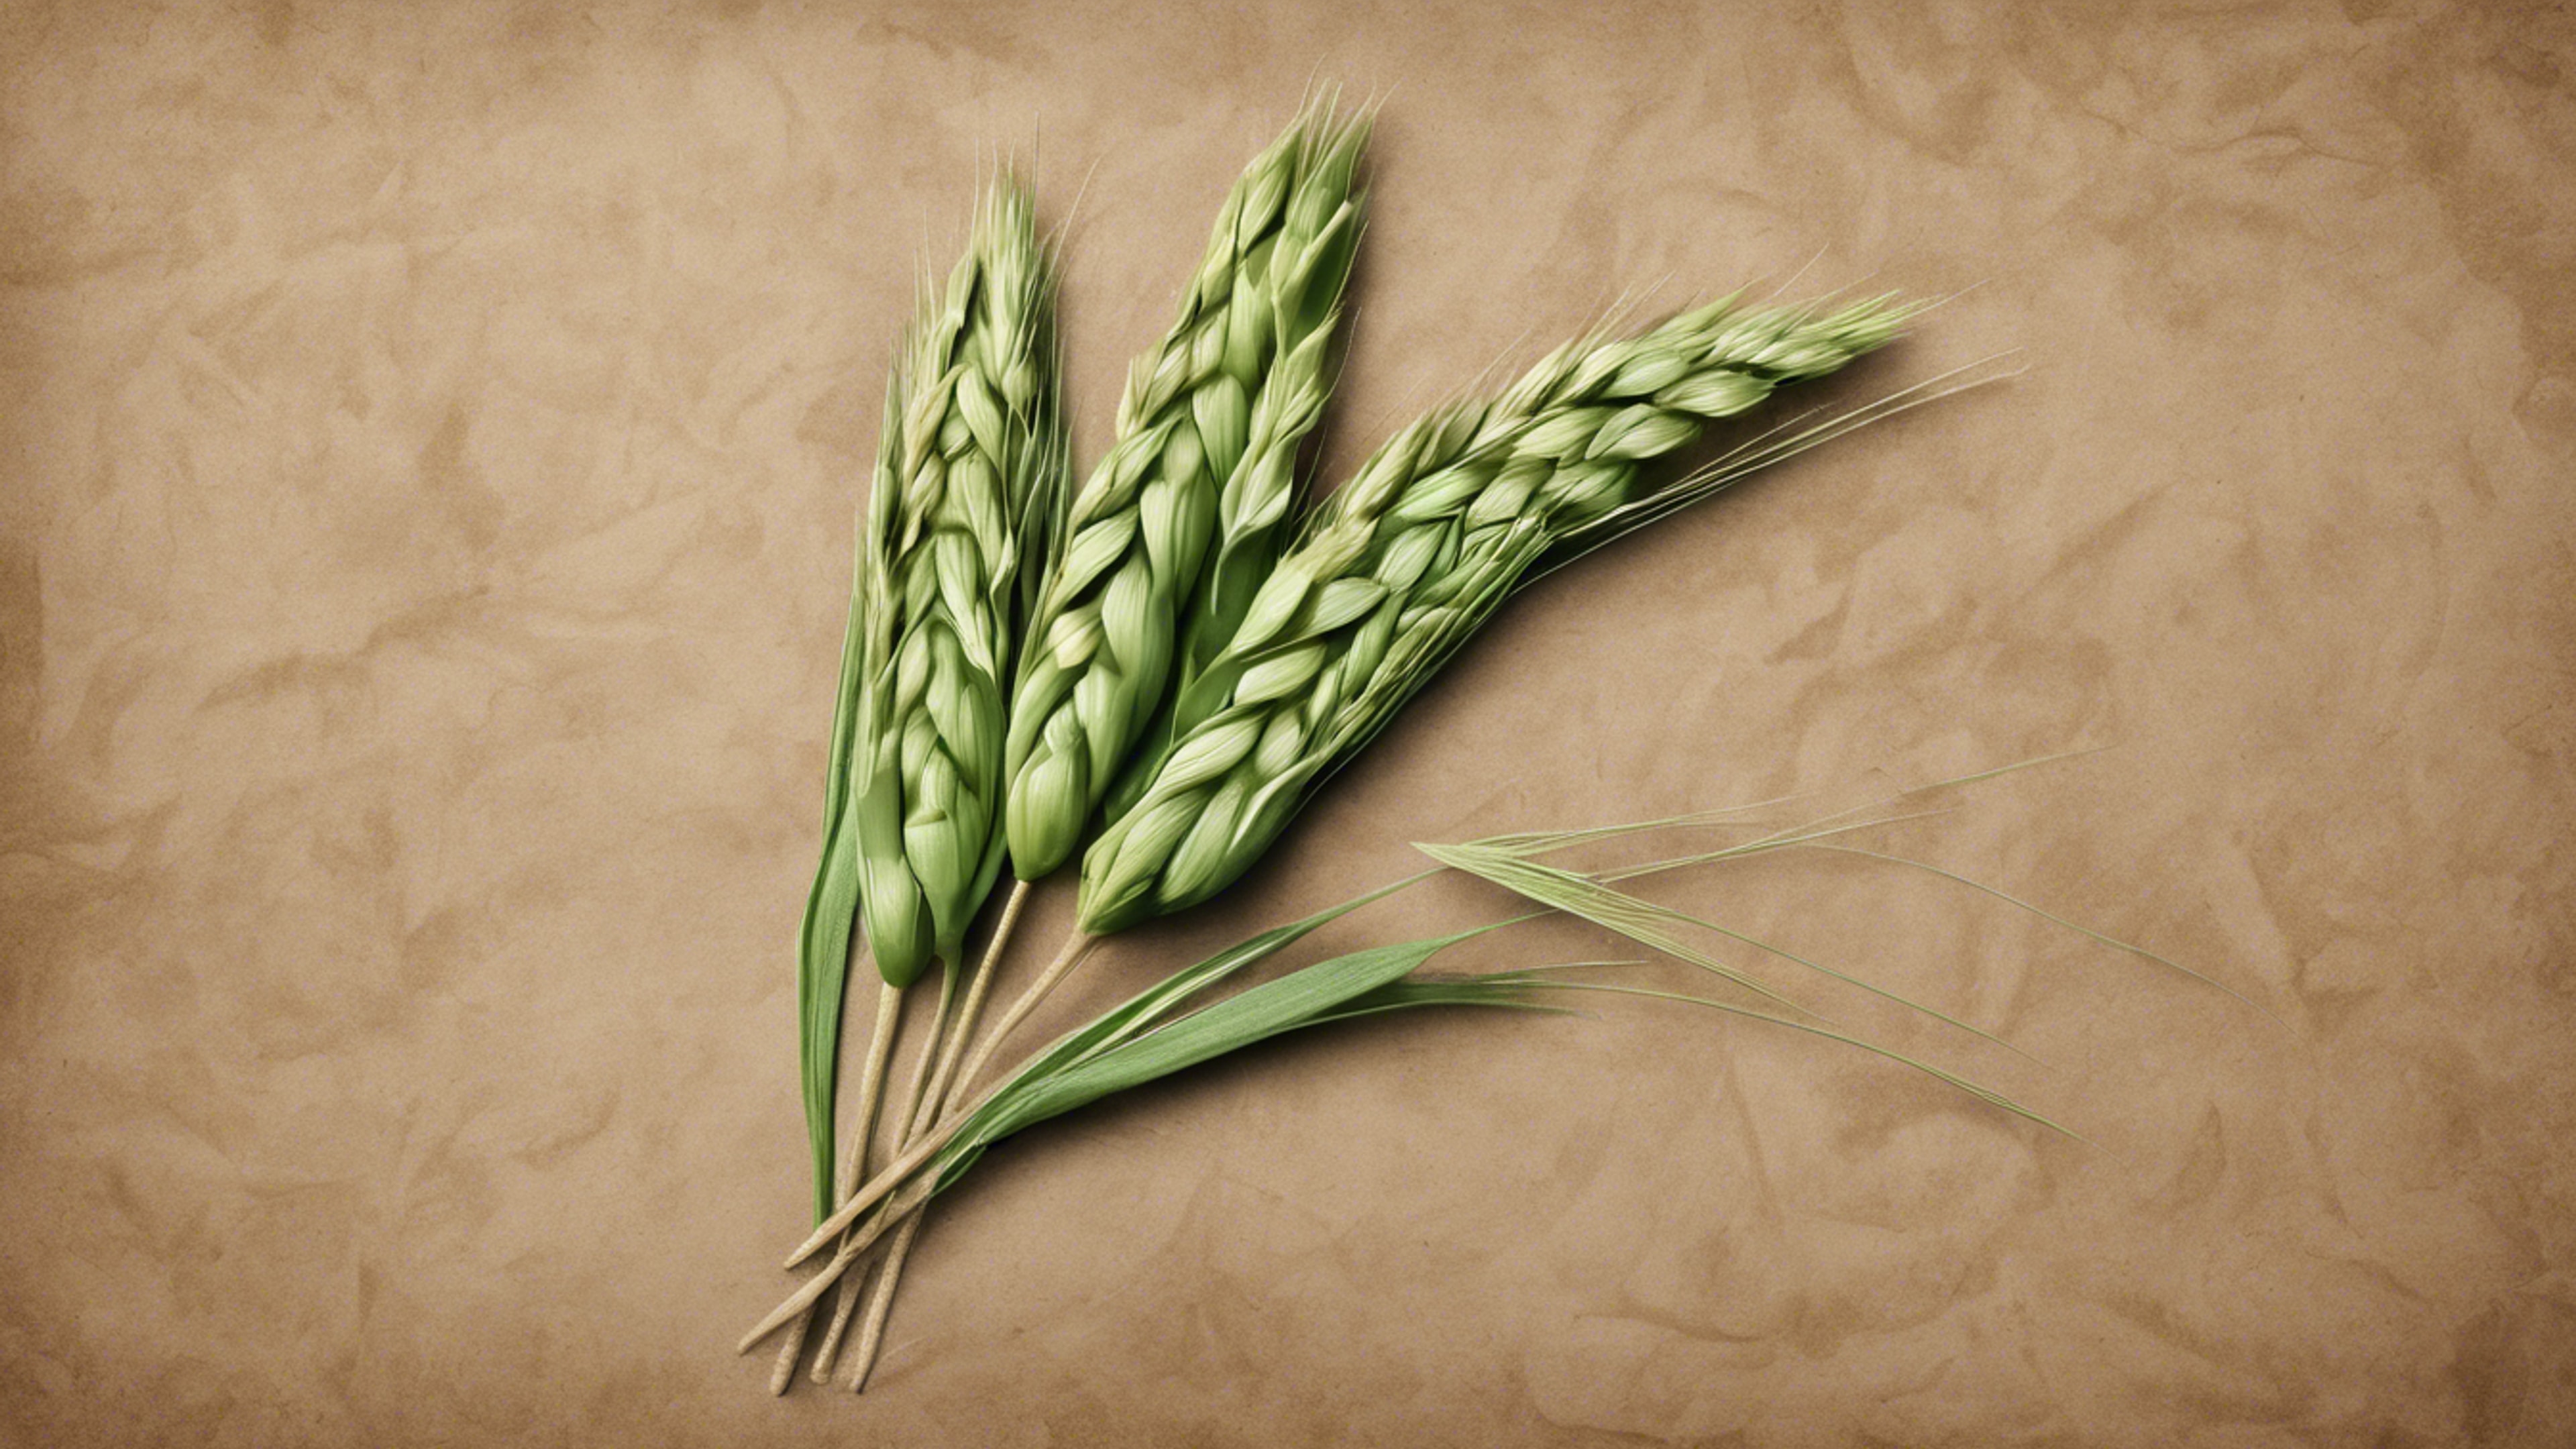 A detailed botanical illustration of a stalk of green wheat against an aged brown paper background. Валлпапер[958050ab552342b3bed0]